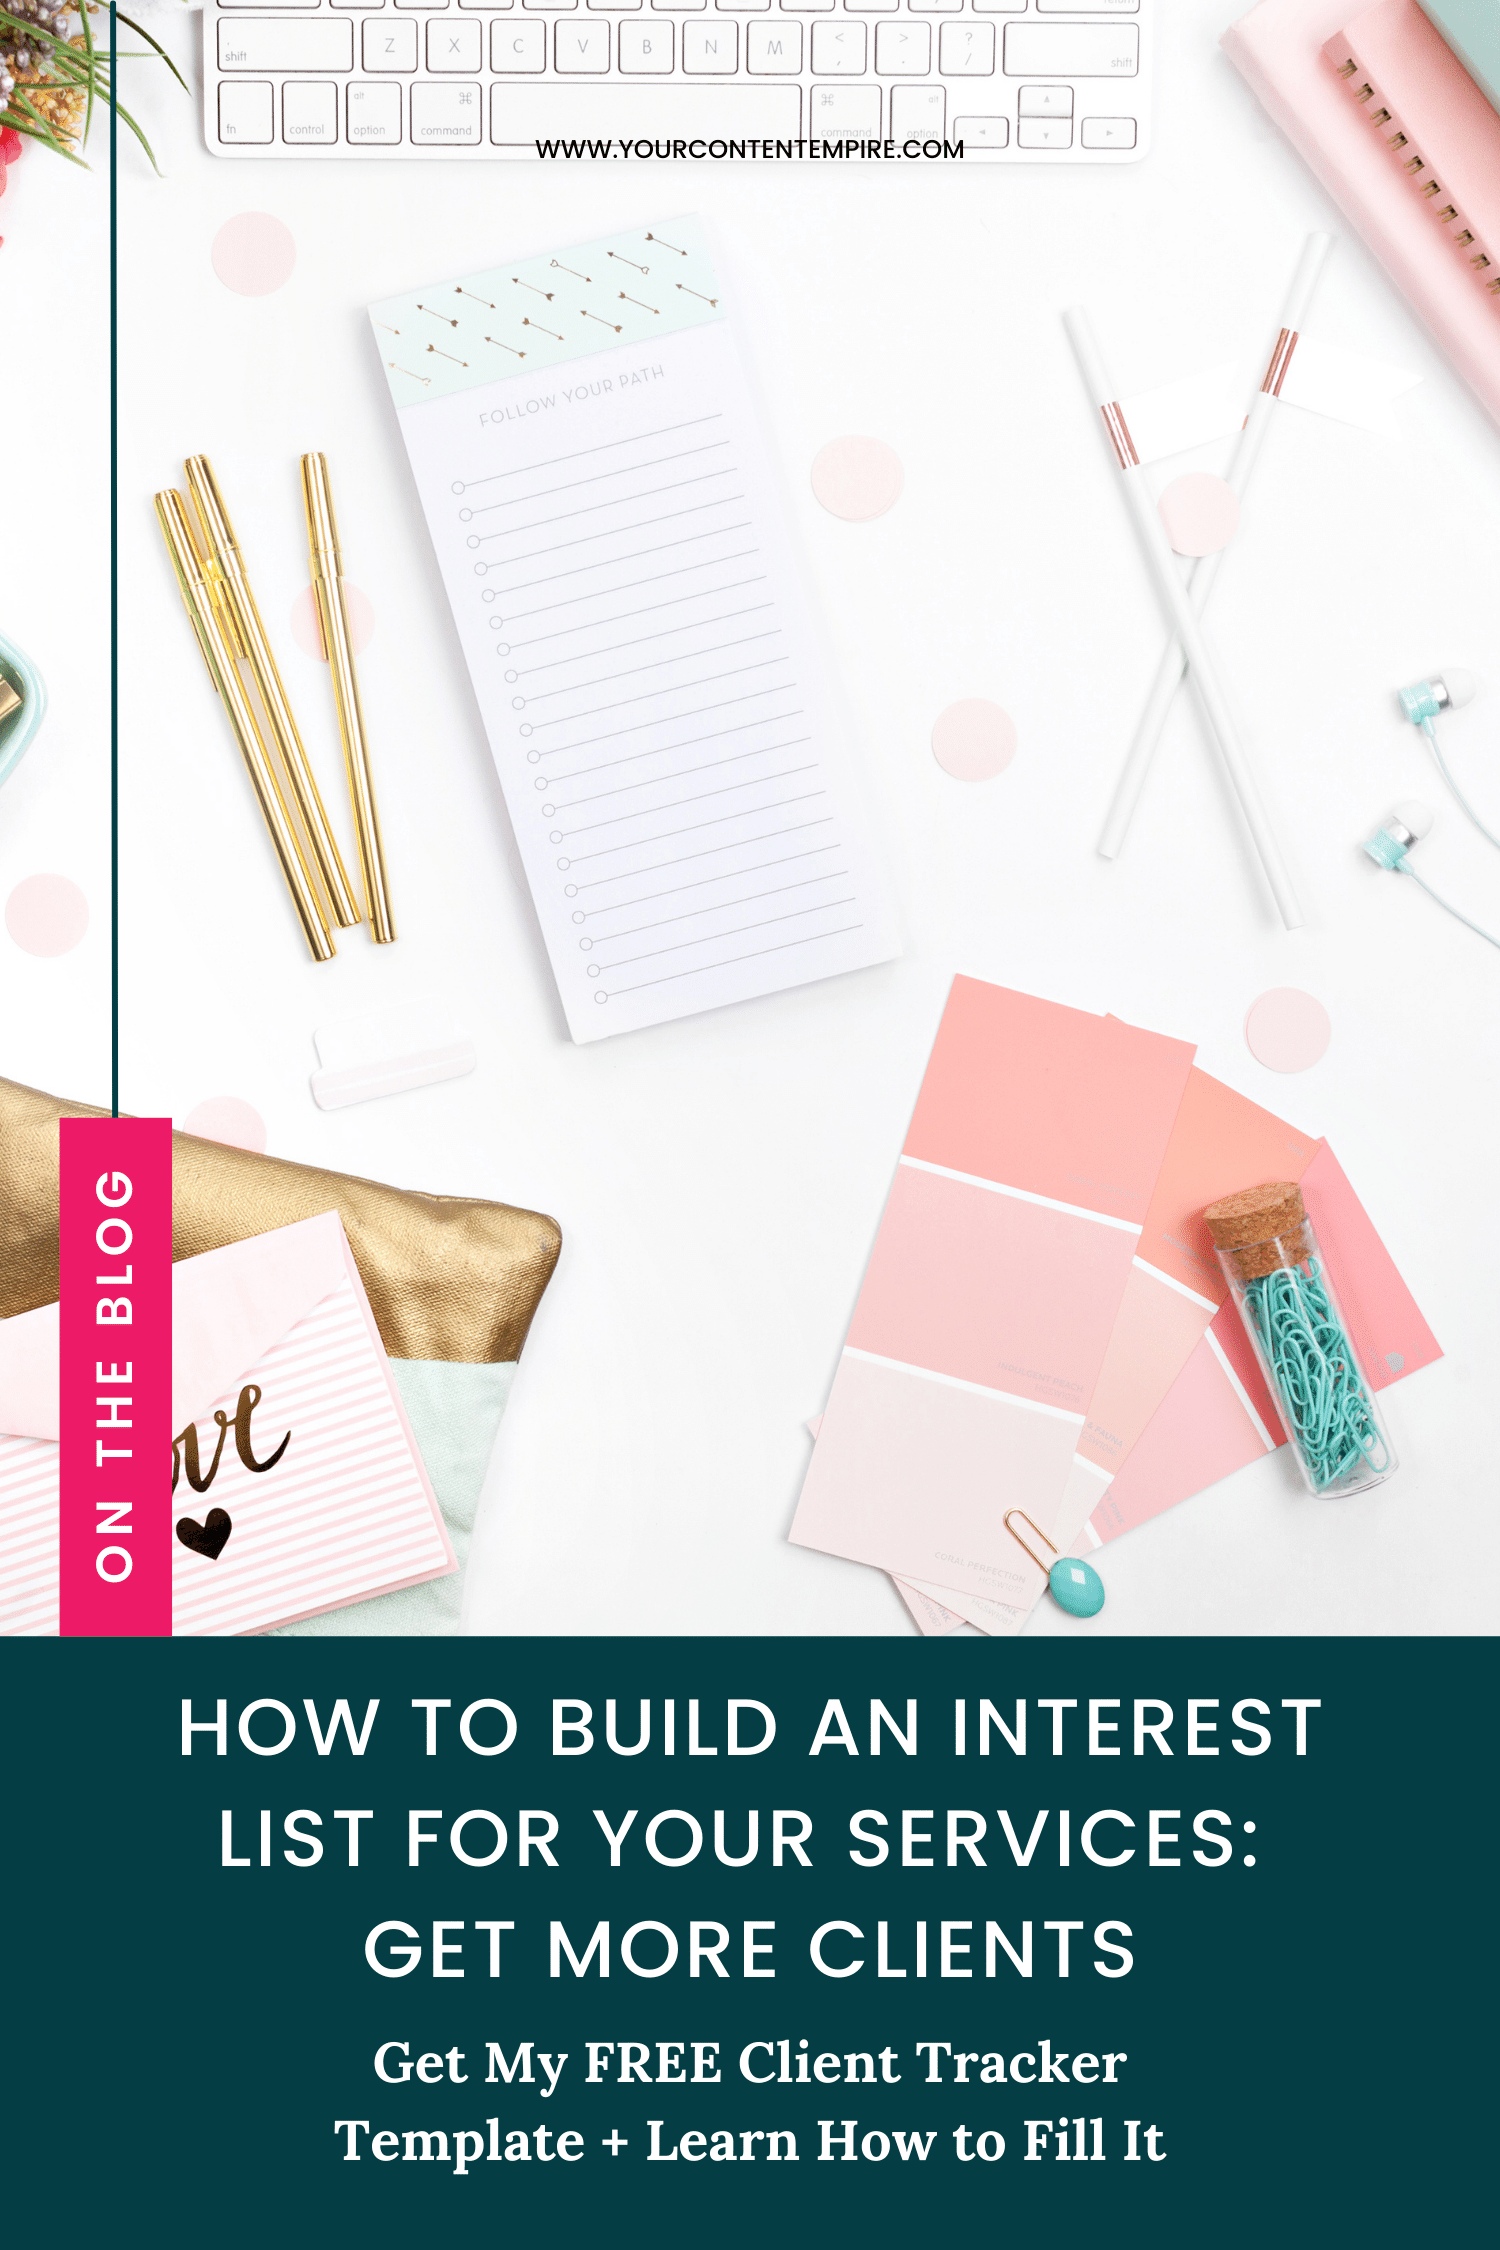 How to Build an Interest List for Your Services: Get More Clients